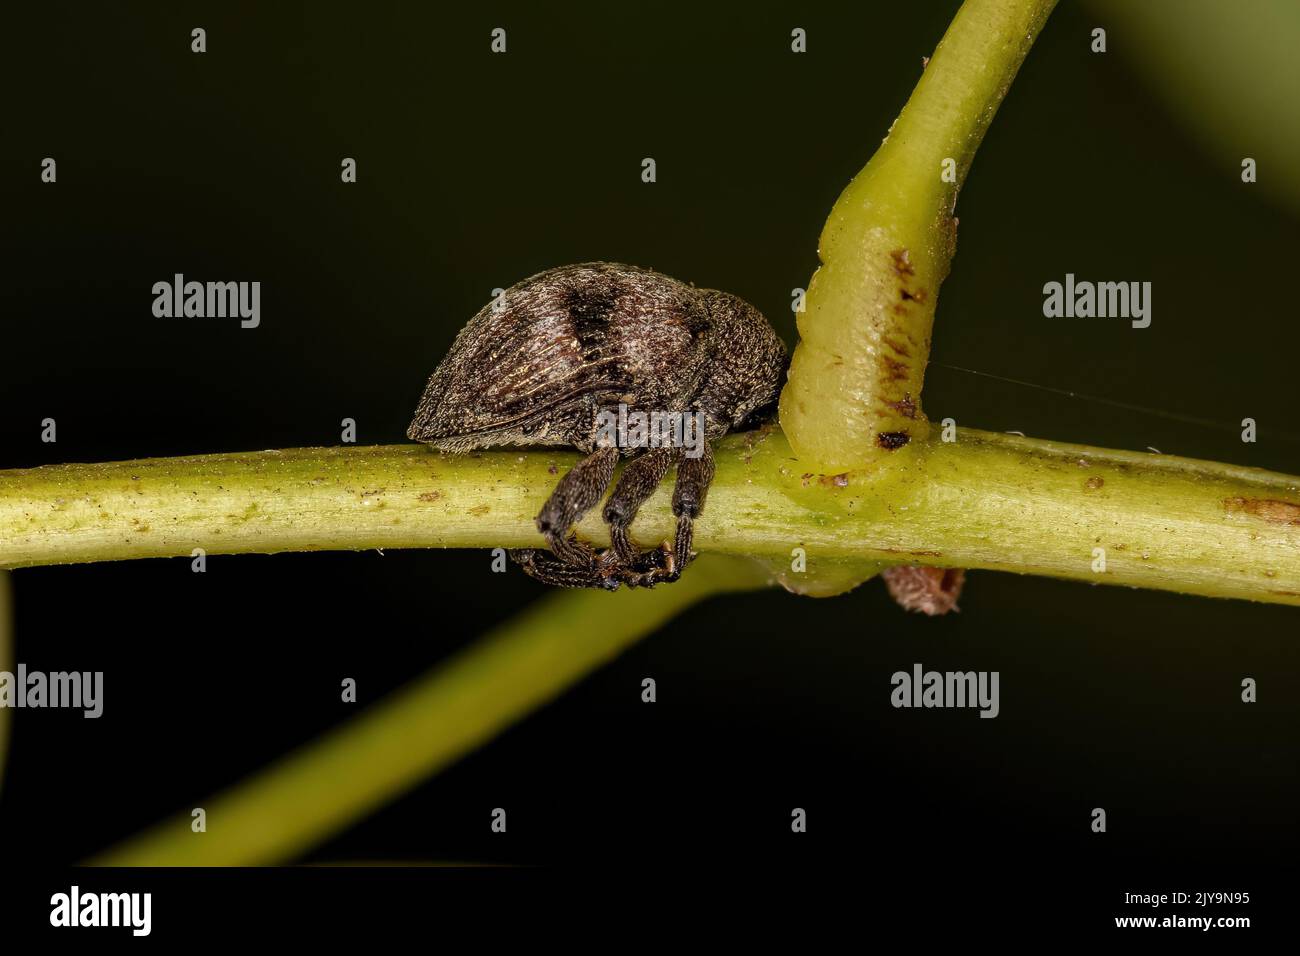 Adult True Weevil of the Family Curculionidae Stock Photo